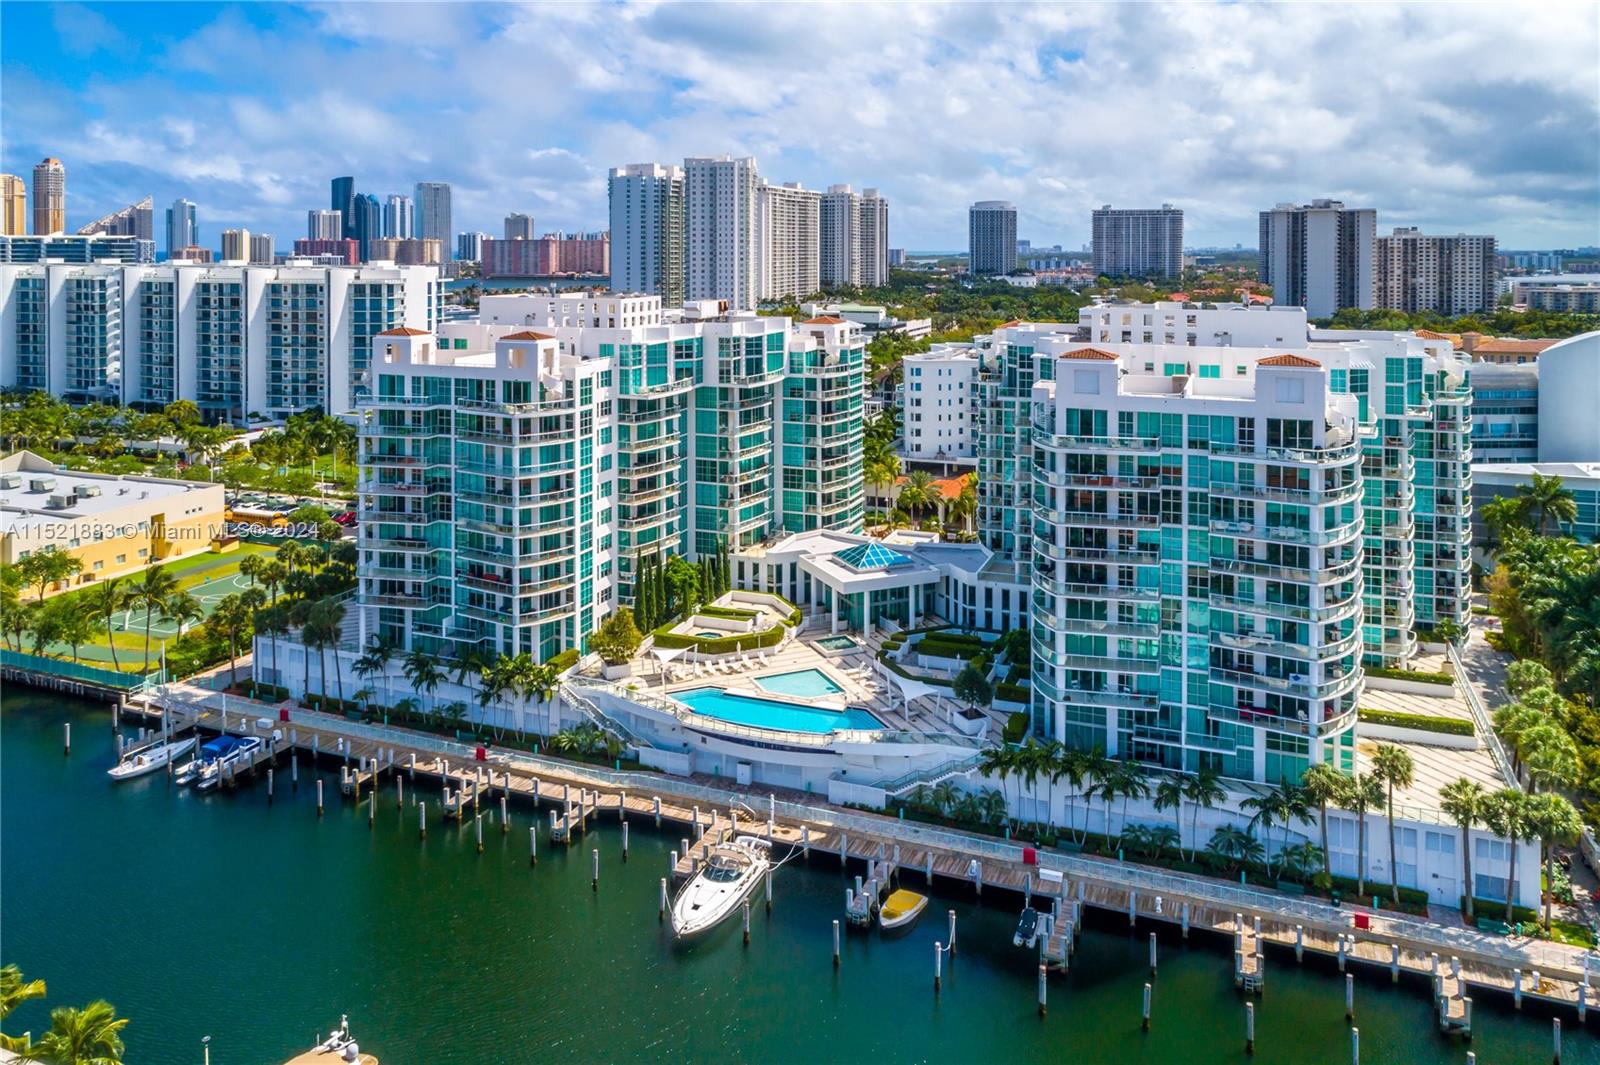 Prime Location in Aventura! Anchor your Lifestyle: Exceptional Apartment,Best floor plan with view of the marina & pool + Option to purchase one  Boat Slip-31 ft'(+$130K Boat slip is not included in the purchase price). The ready-to-move-in property features 2 bedrooms,2.5 baths, & an oversized terrace. Floor-to-ceiling windows let natural light into the ample living space and the contemporary kitchen with stainless steel appliances. Designed for a sophisticated and luxurious lifestyle. The Atrium offers top-of-the-line amenities such as a state-of-the-art fitness center, hot tub, pool, playground, 24 security, valet & Private Marina with boat slips. Walking distance to shops, restaurants, Aventura Mall, A+ rated schools & the beaches. 20 mn from Miami and Fort Lauderdale Airport.